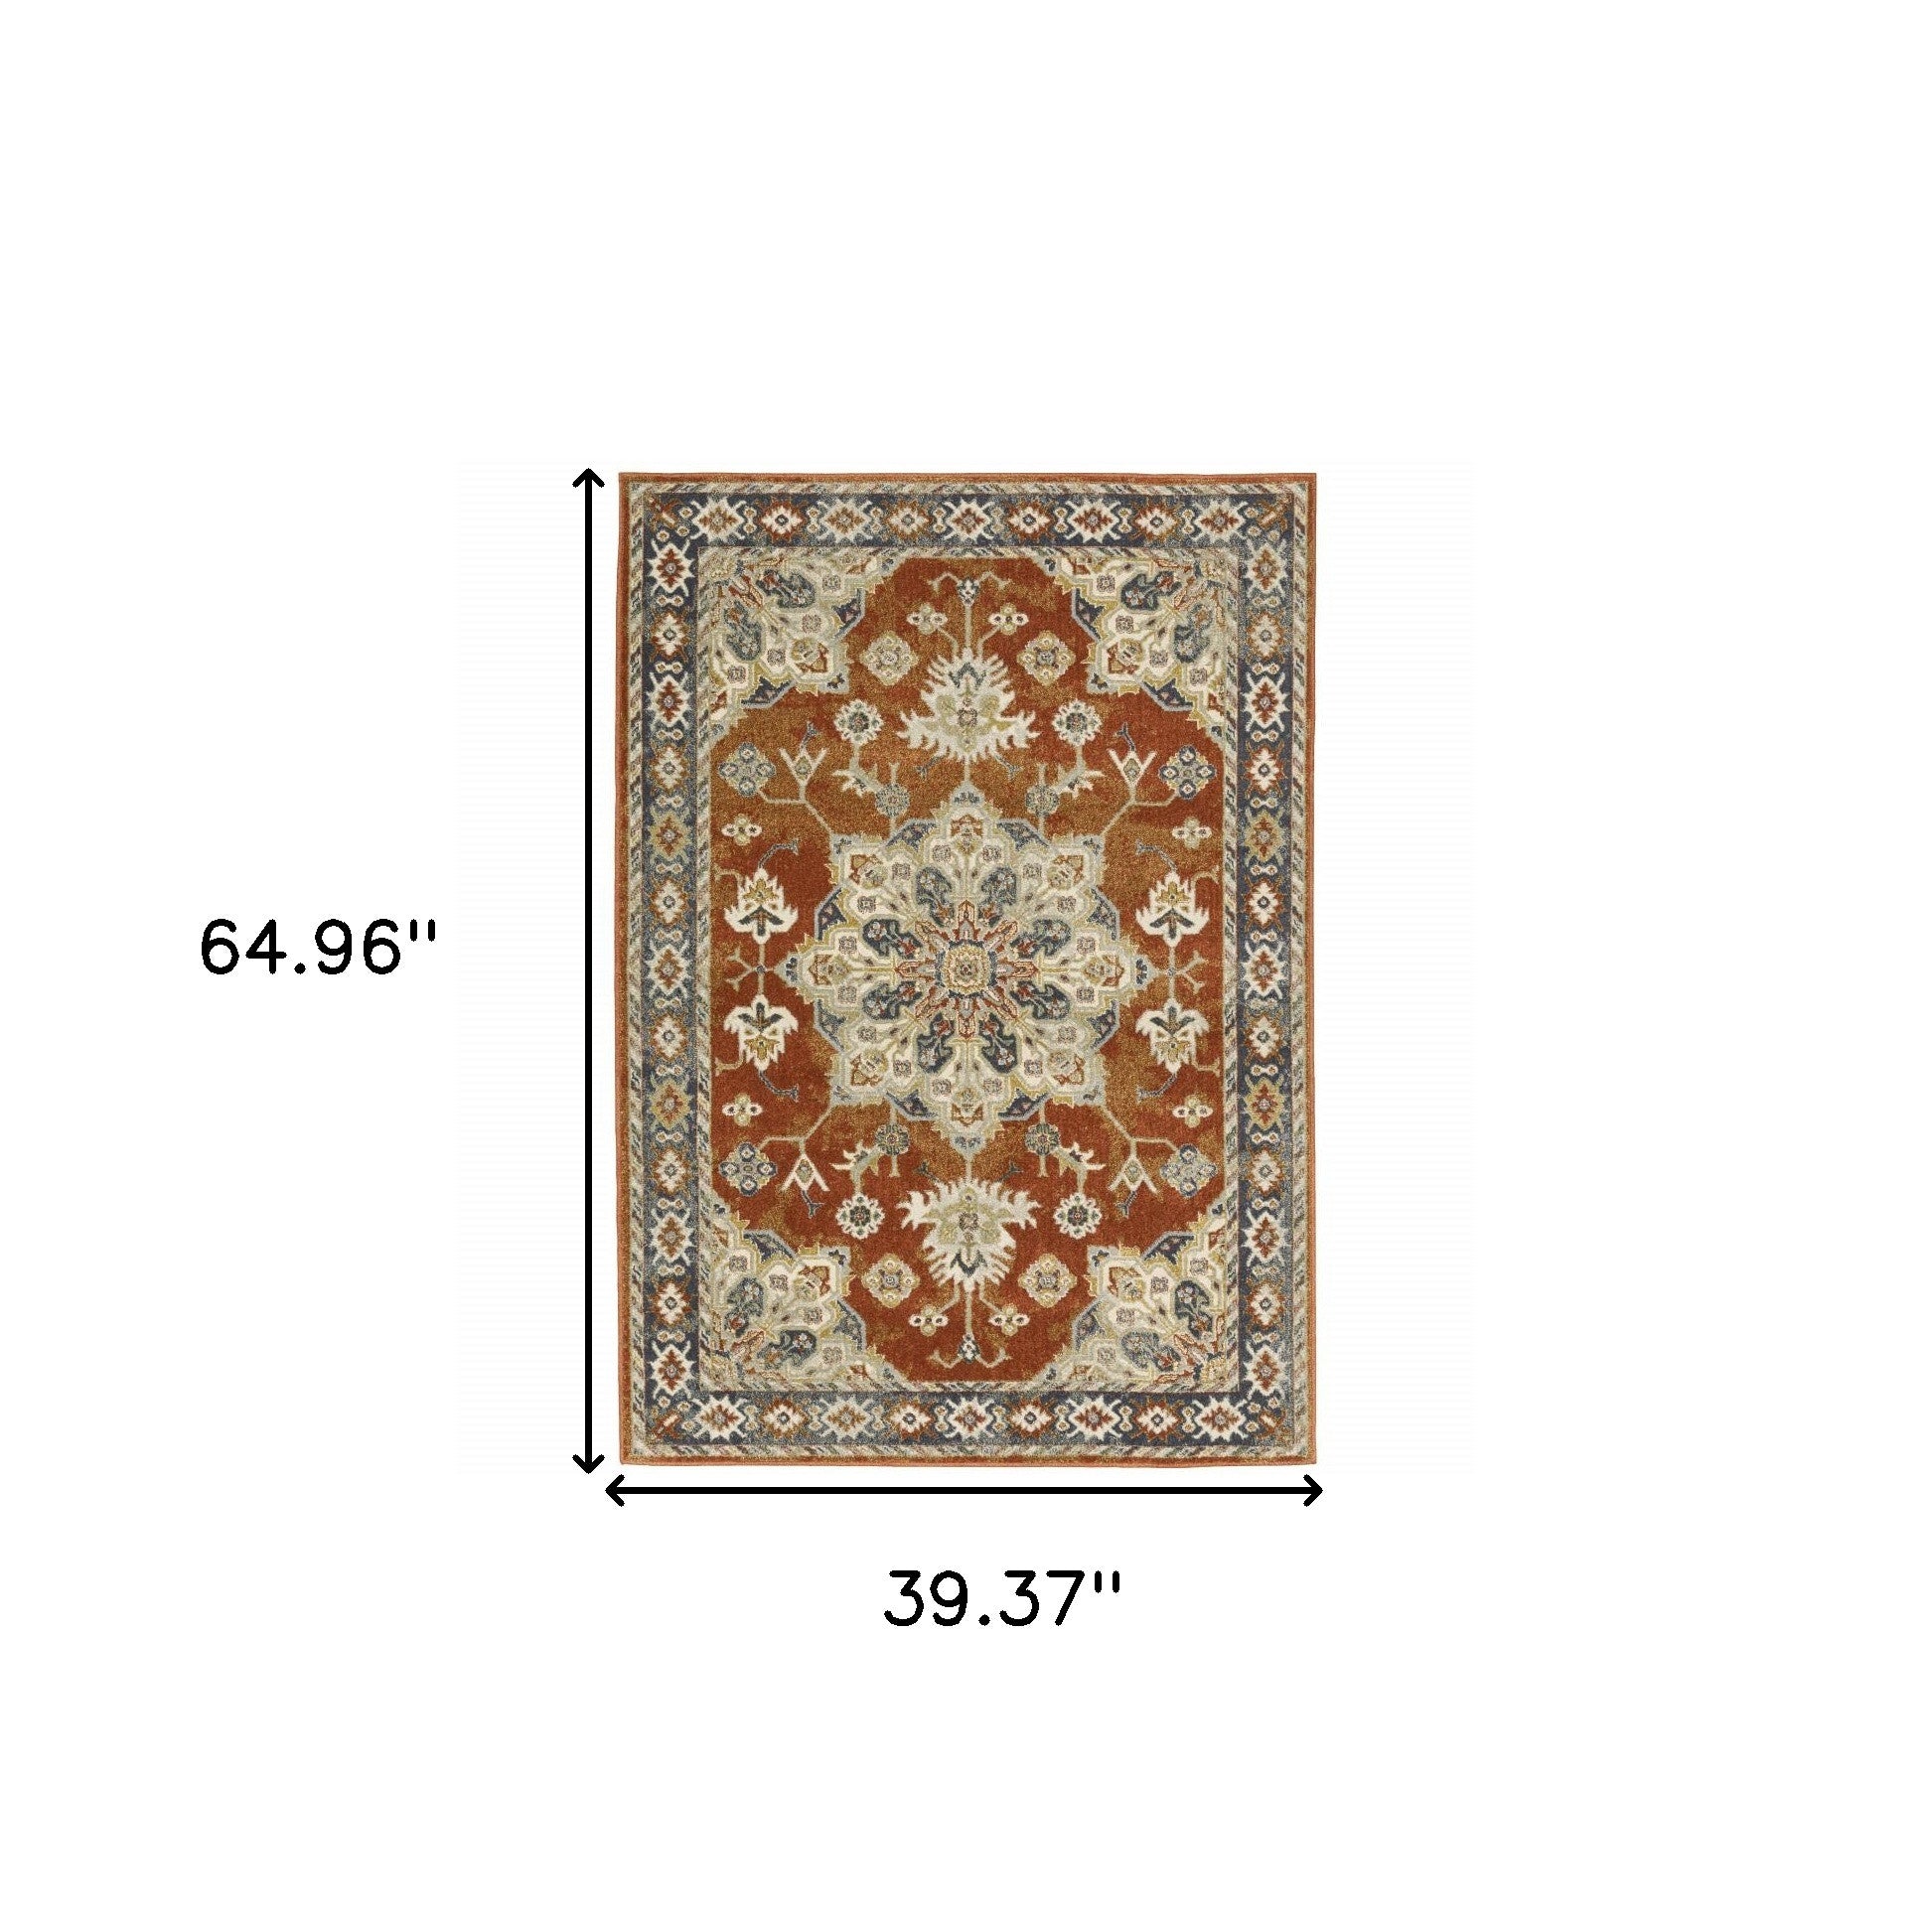 3' X 5' Rust Beige Teal Blue And Gold Oriental Power Loom Stain Resistant Area Rug